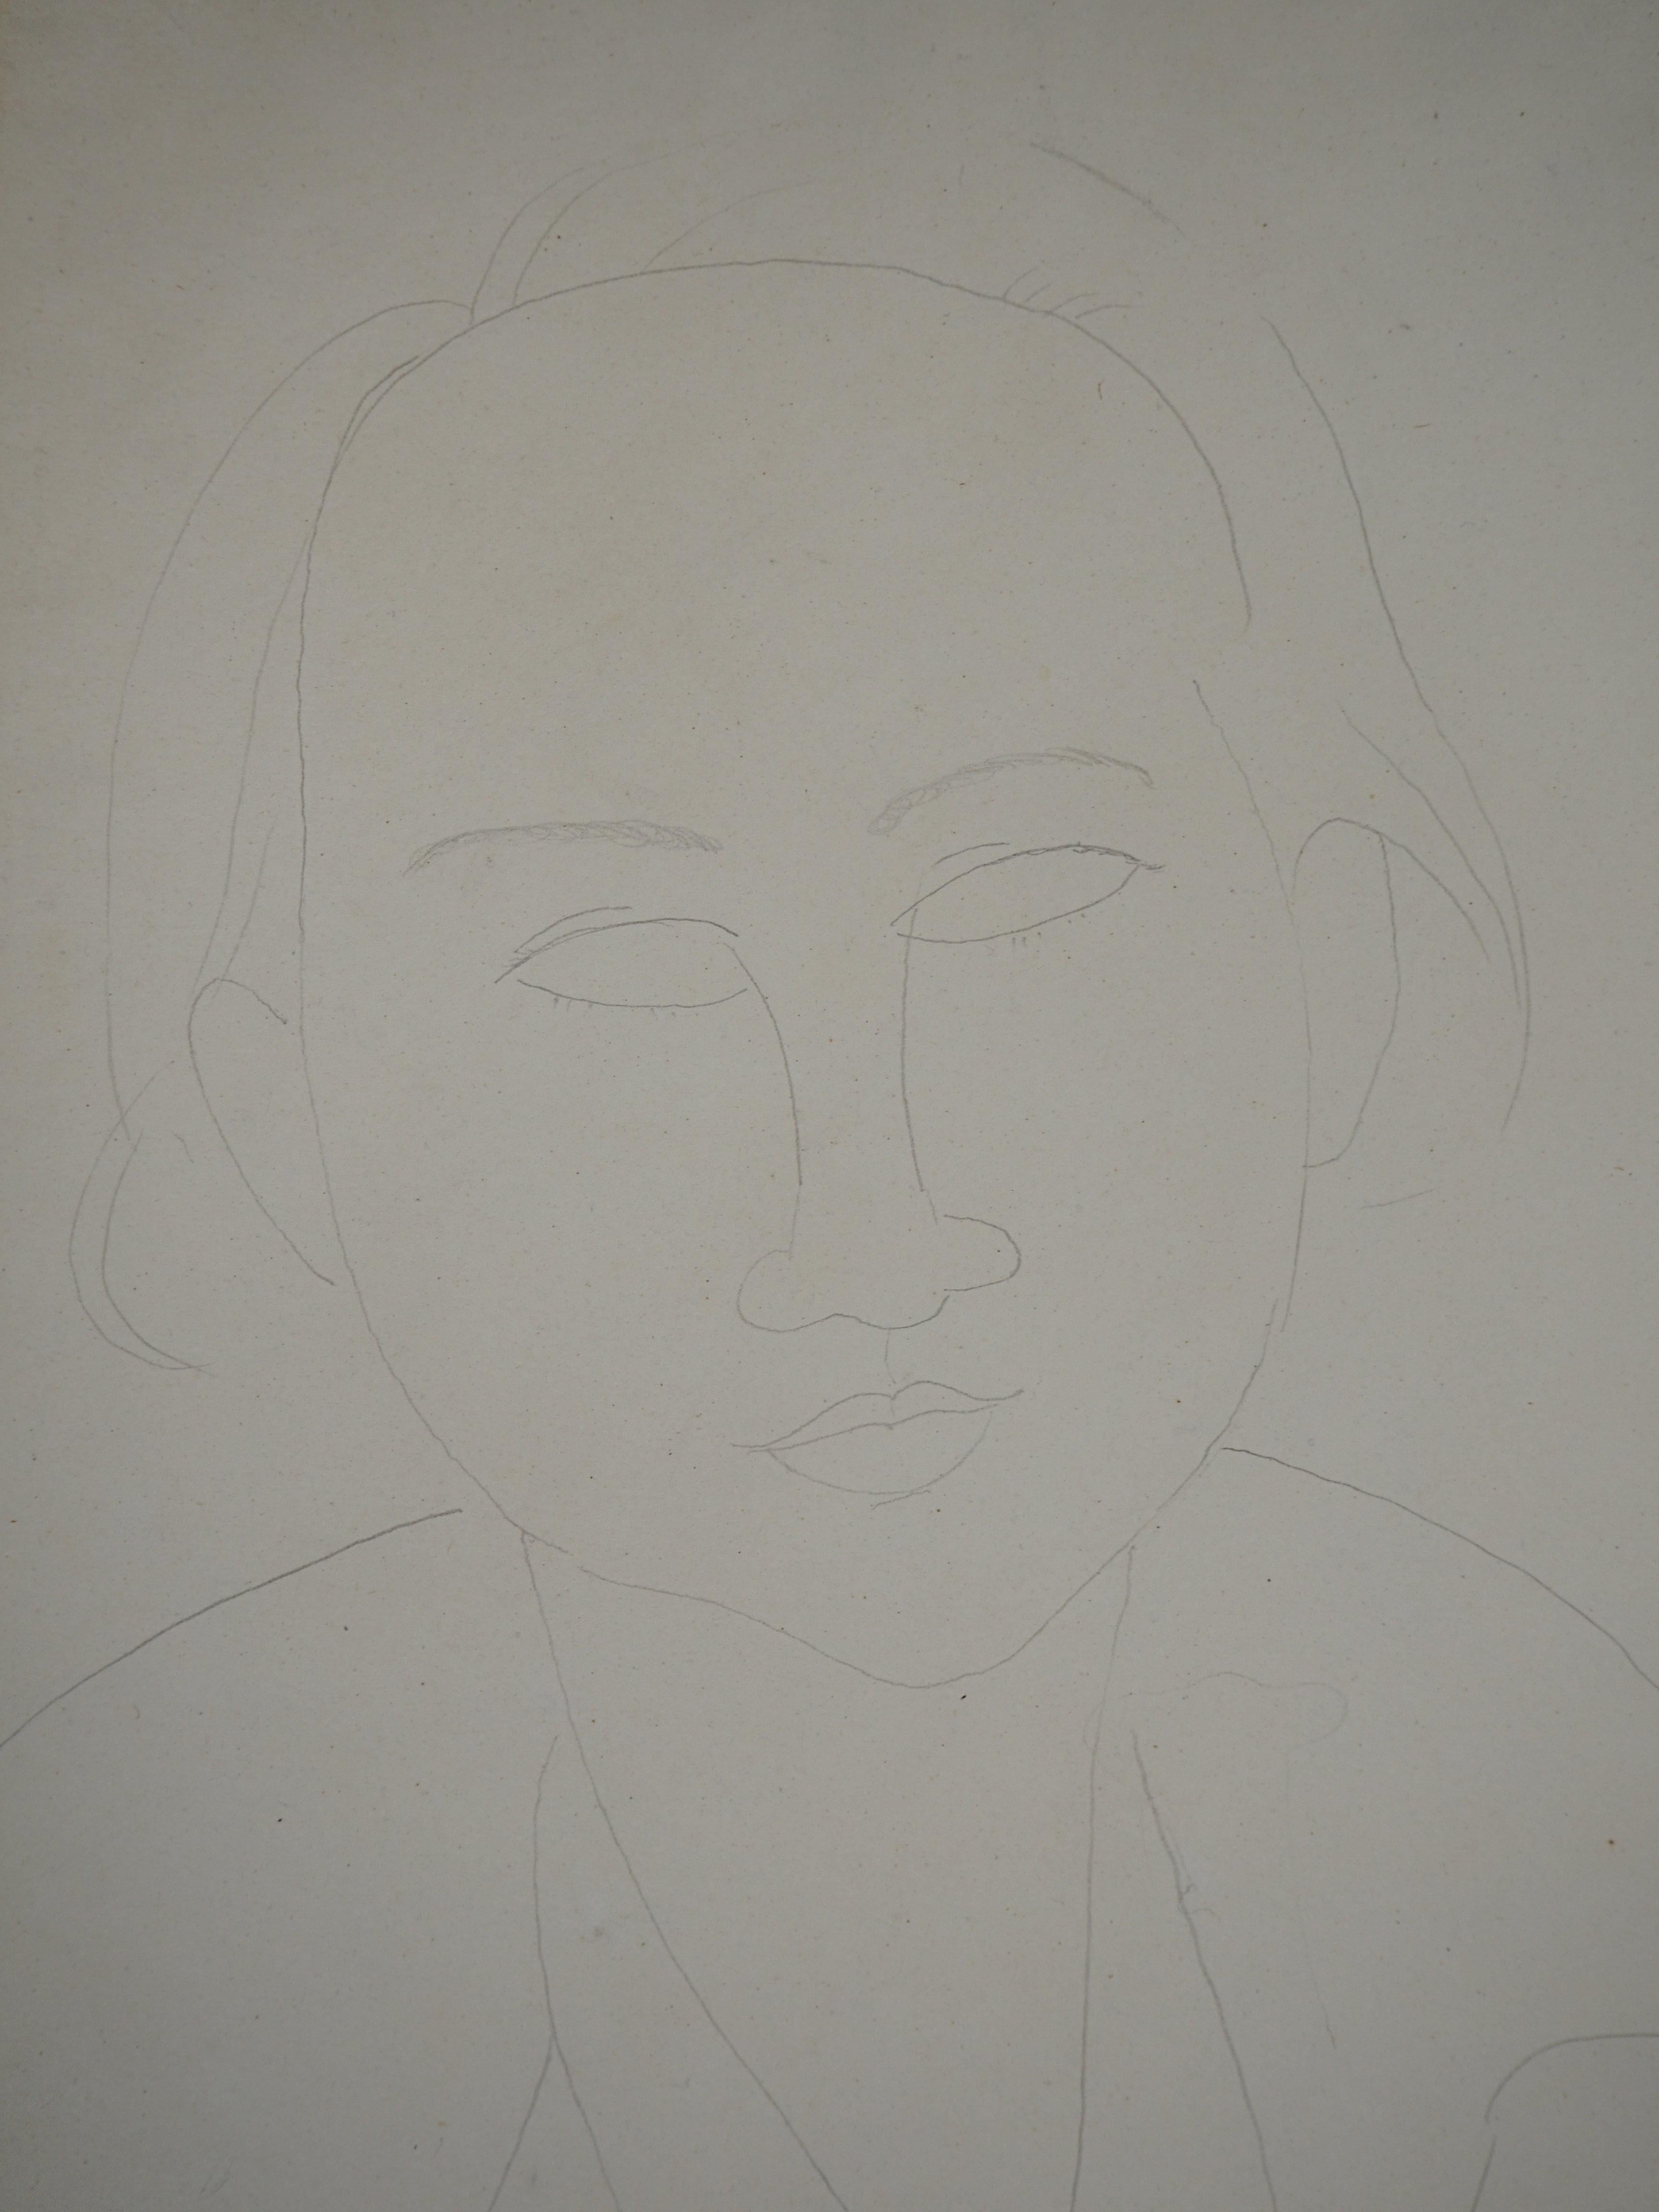 Amedeo Modigliani
Portrait of Elena, c. 1917

Original drawing in graphite pencil.
Signed in the bottom right-hand corner
On paper 40 x 25.5 cm (c. 16 x 10 in)

Authenticity:
- This drawing will be included in the catalogue raisonné of Amedeo